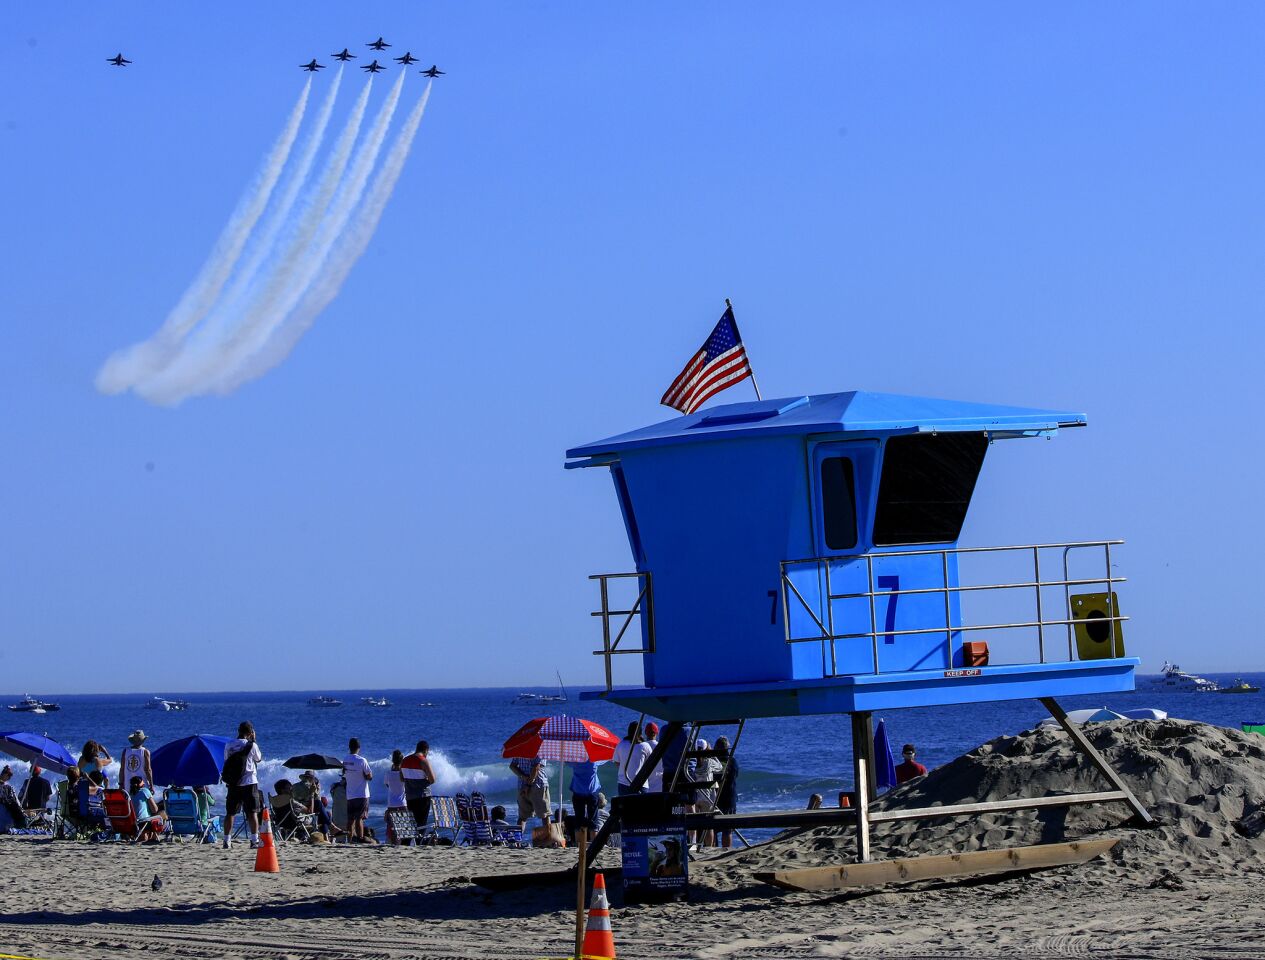 Great Pacific Airshow